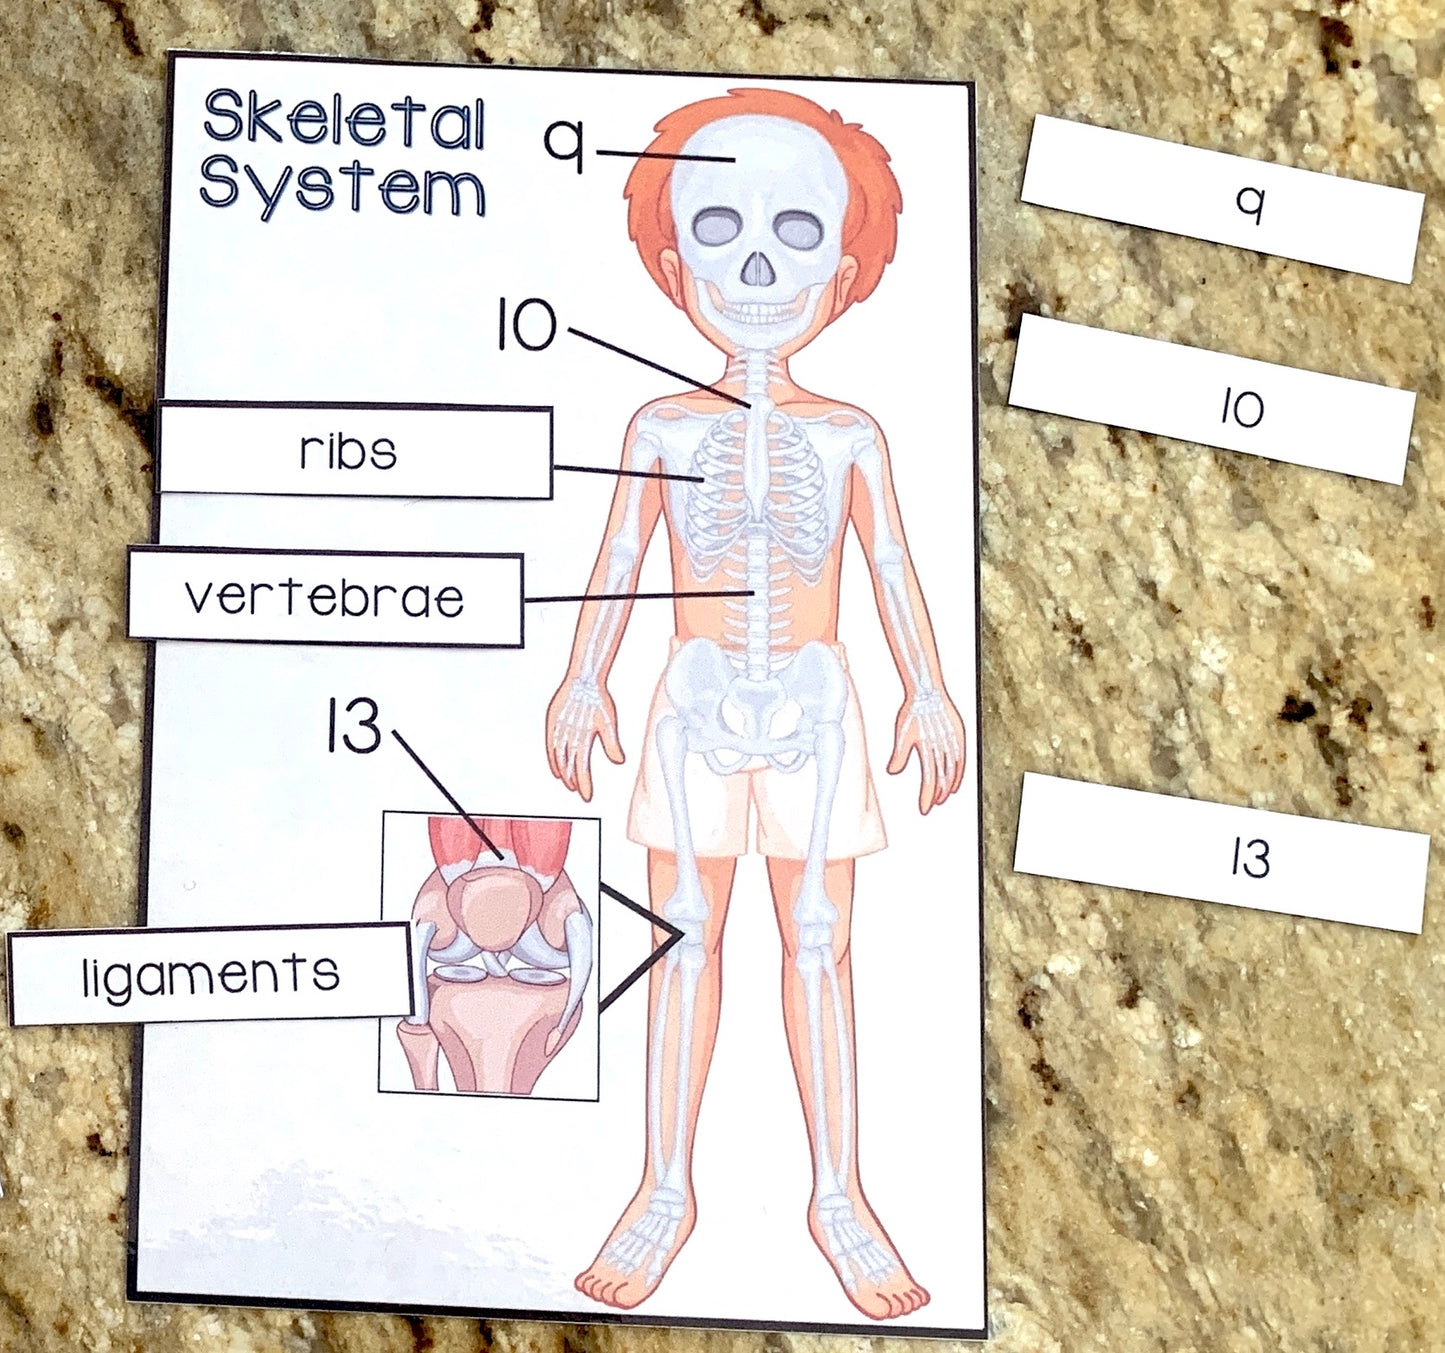 Body Systems Labeling Cards - PHYSICAL & DIGITAL VERSION